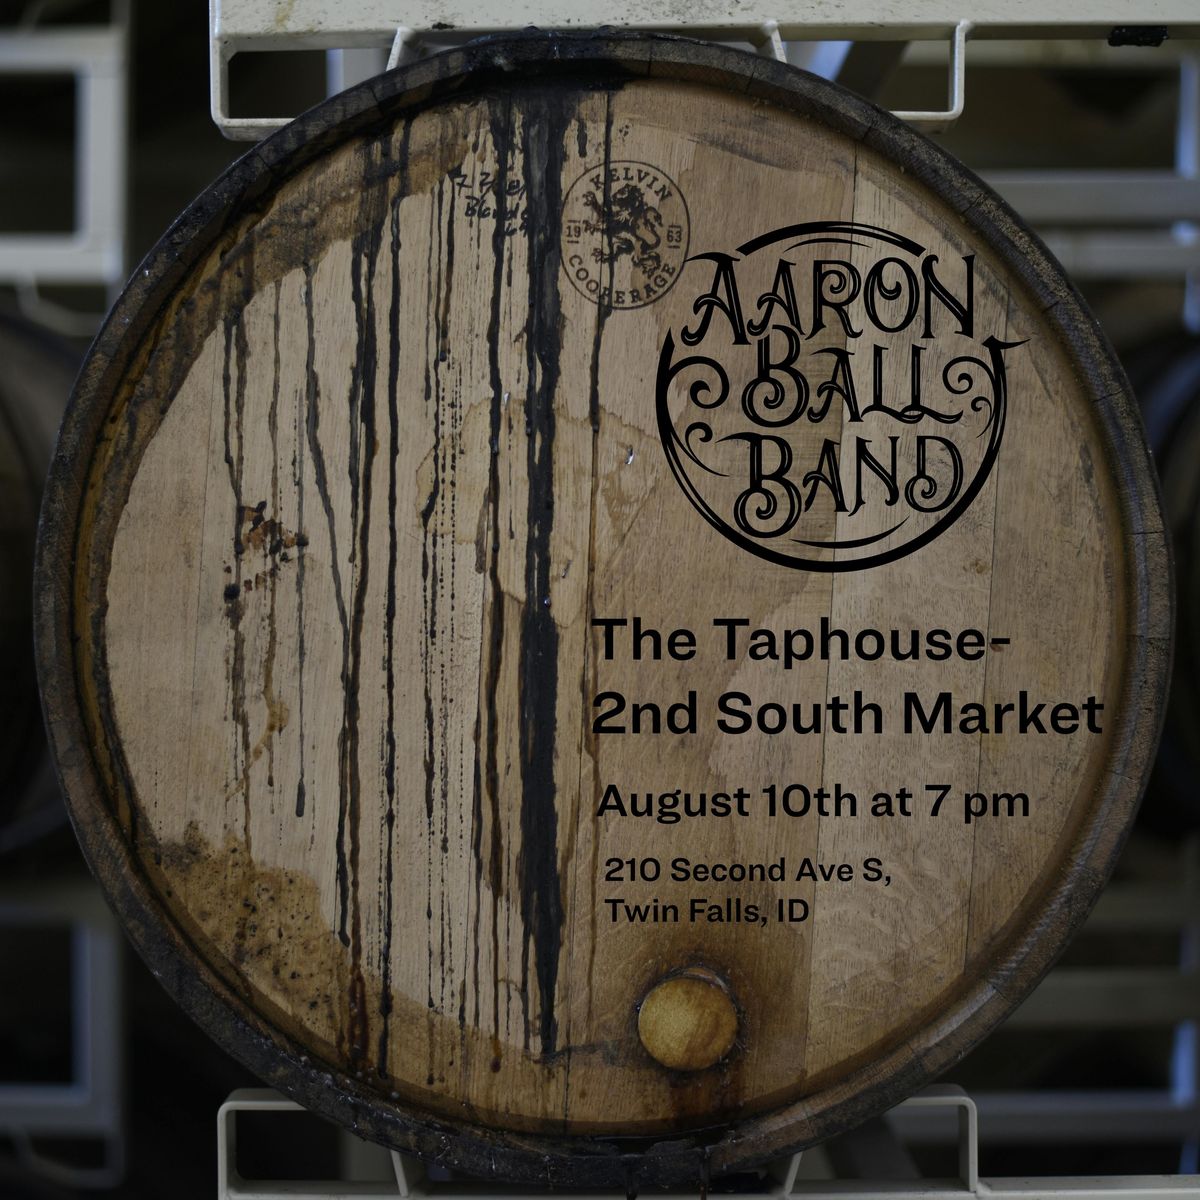 The Taphouse- 2nd South Market presents Aaron Ball Band